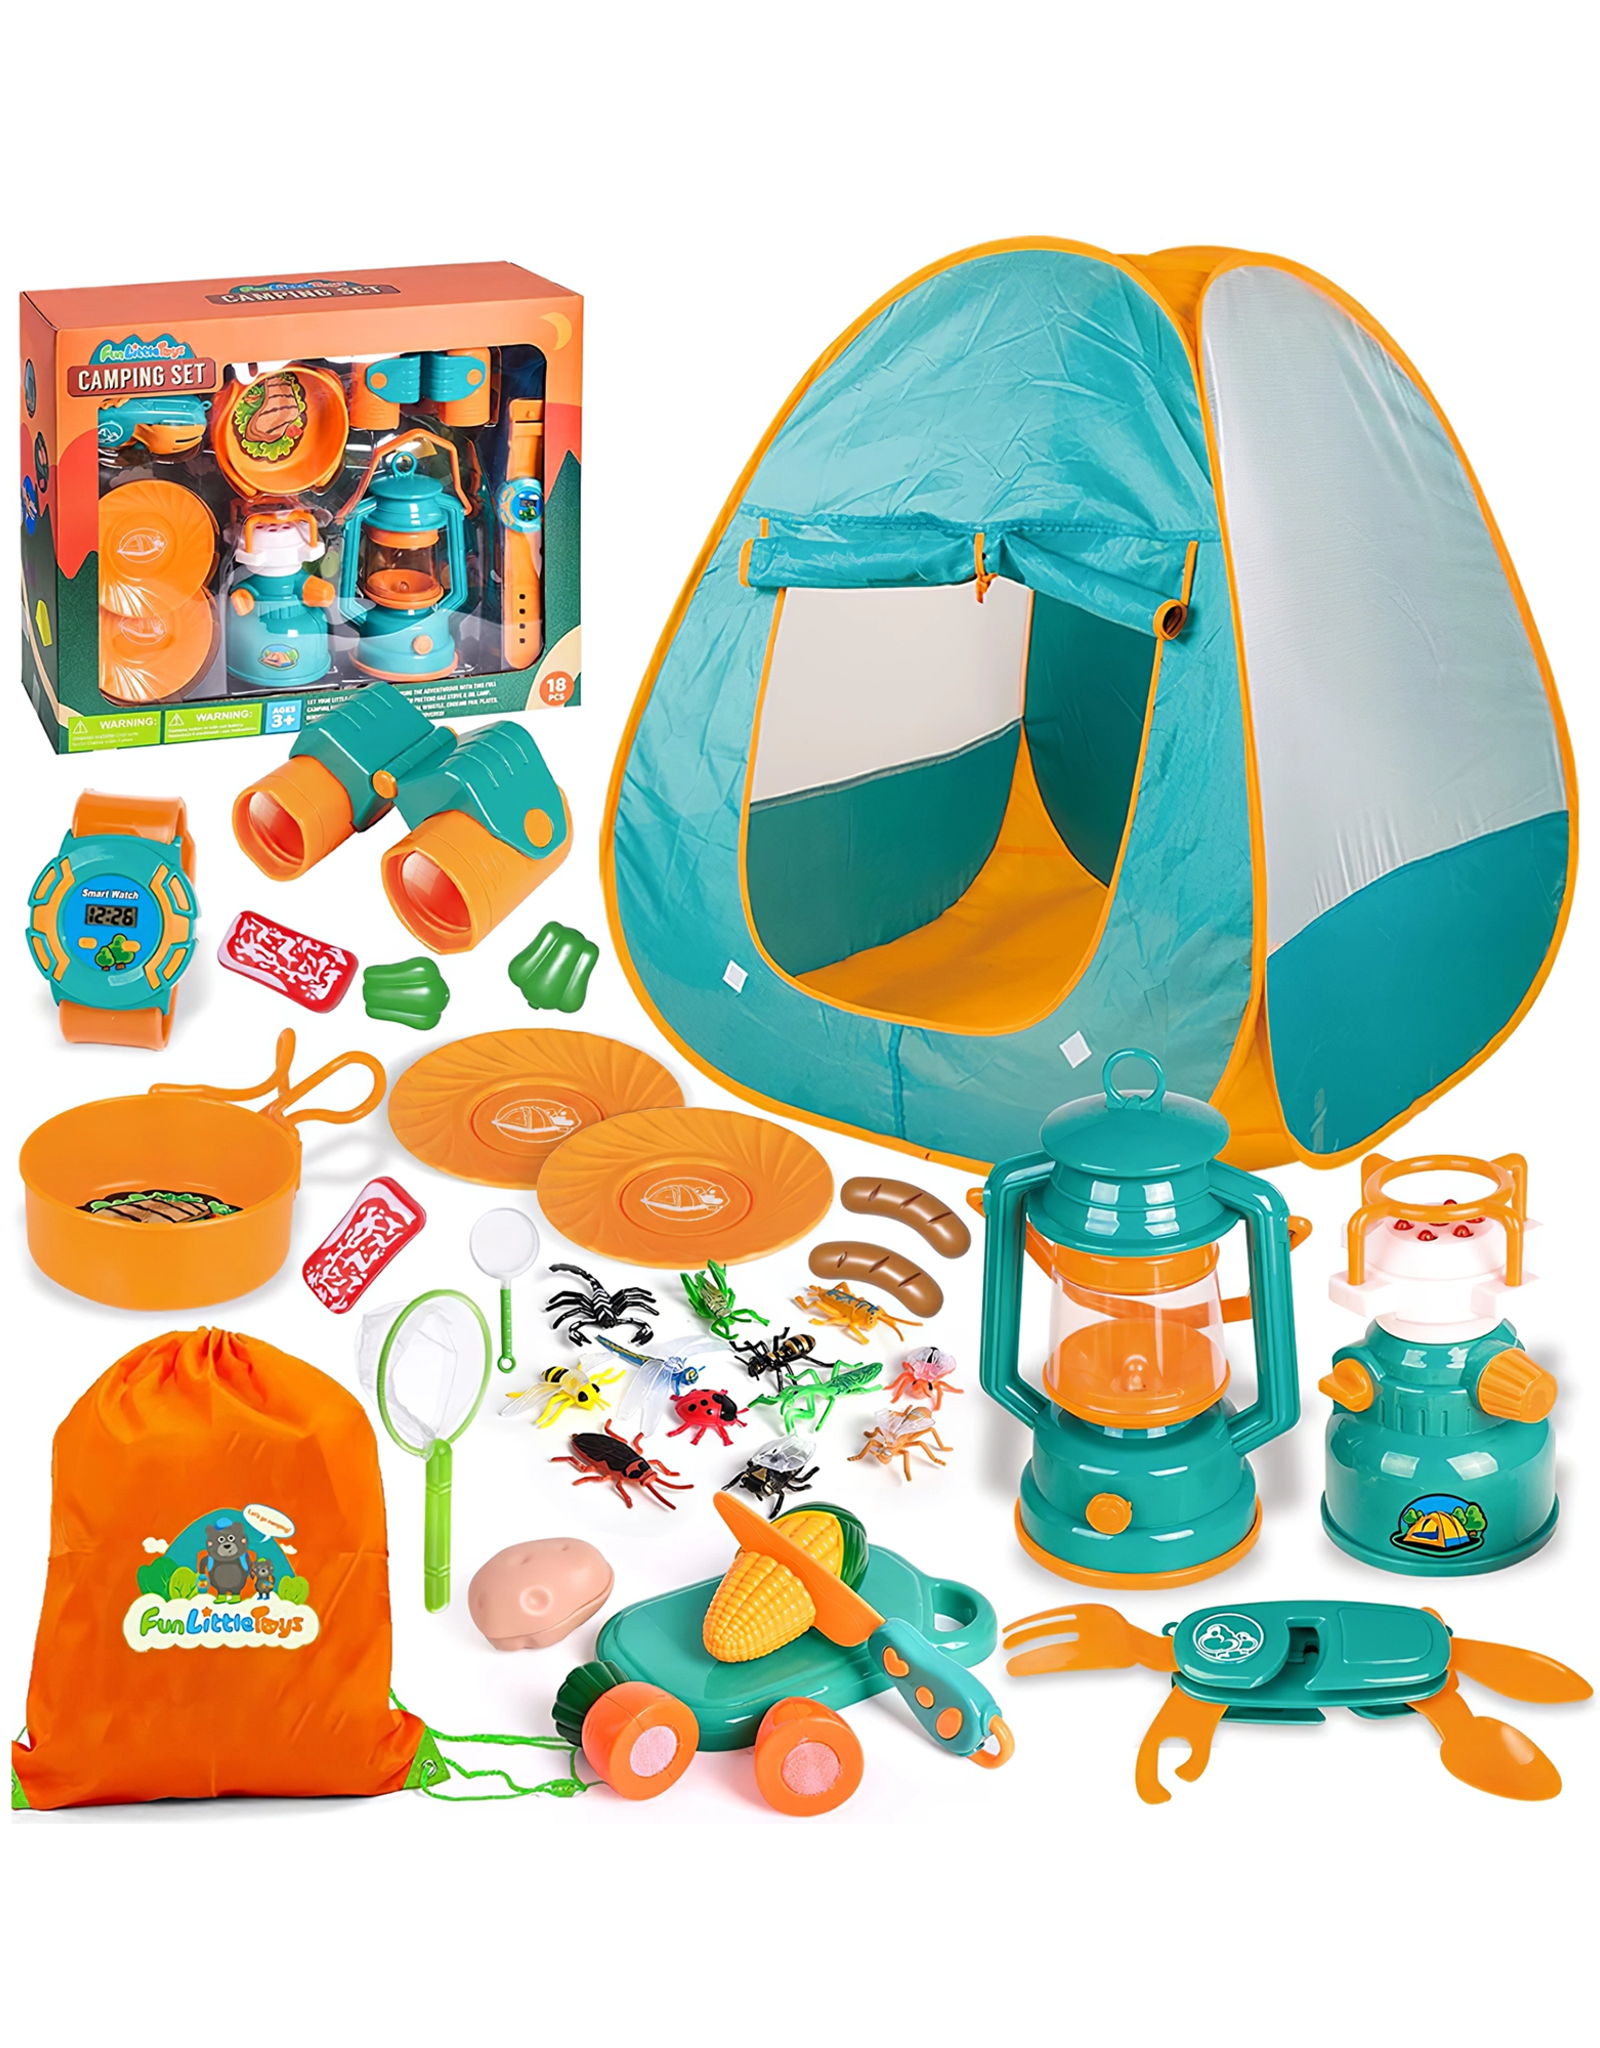 Fun Little Toys Camping Tent w/30 piece set